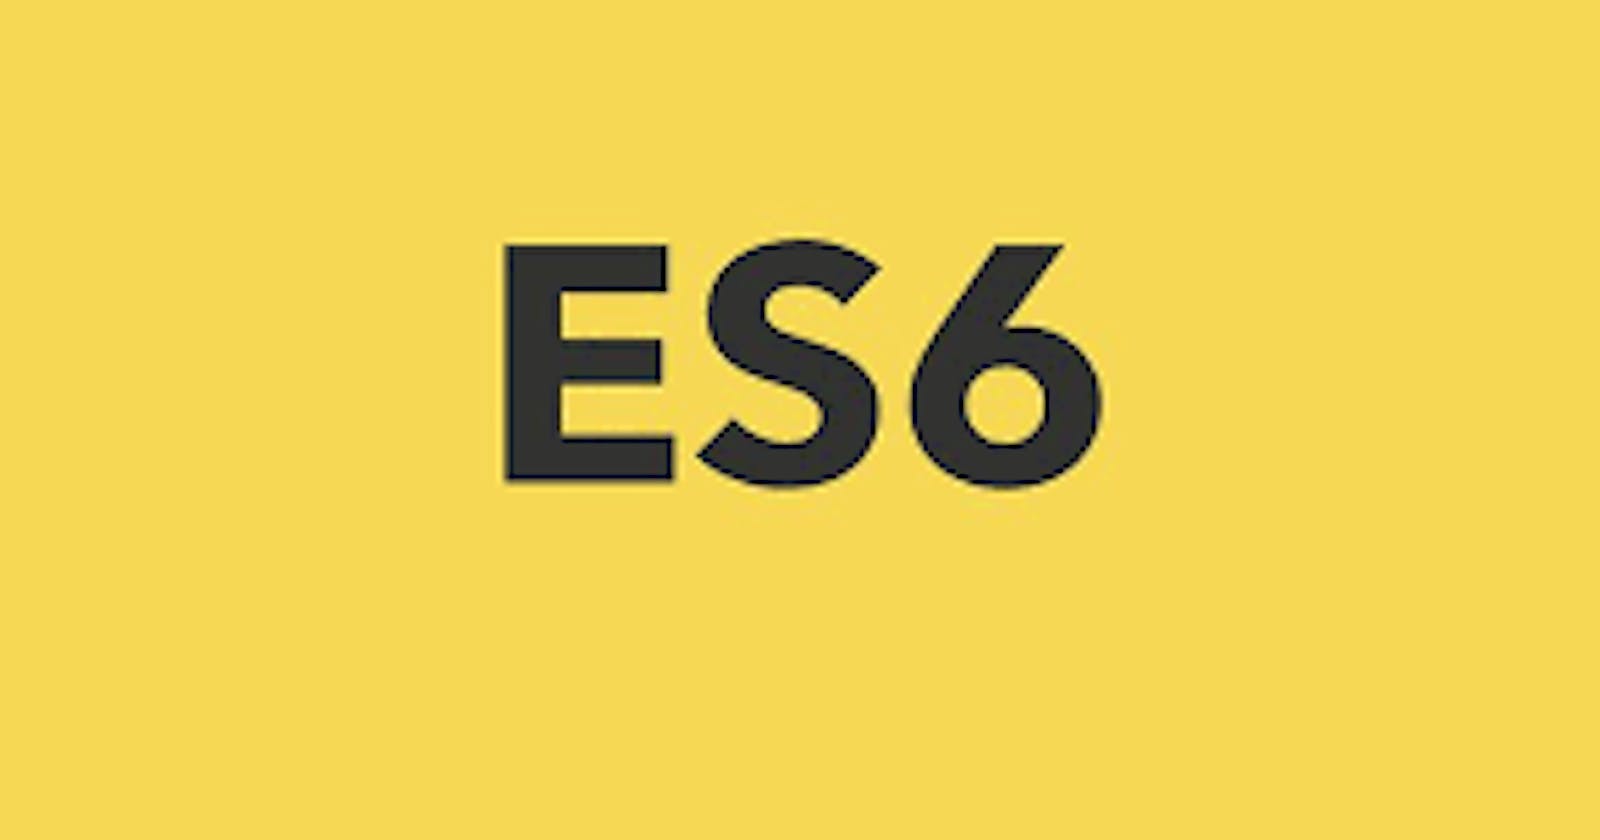 #1: Getting started with ES6